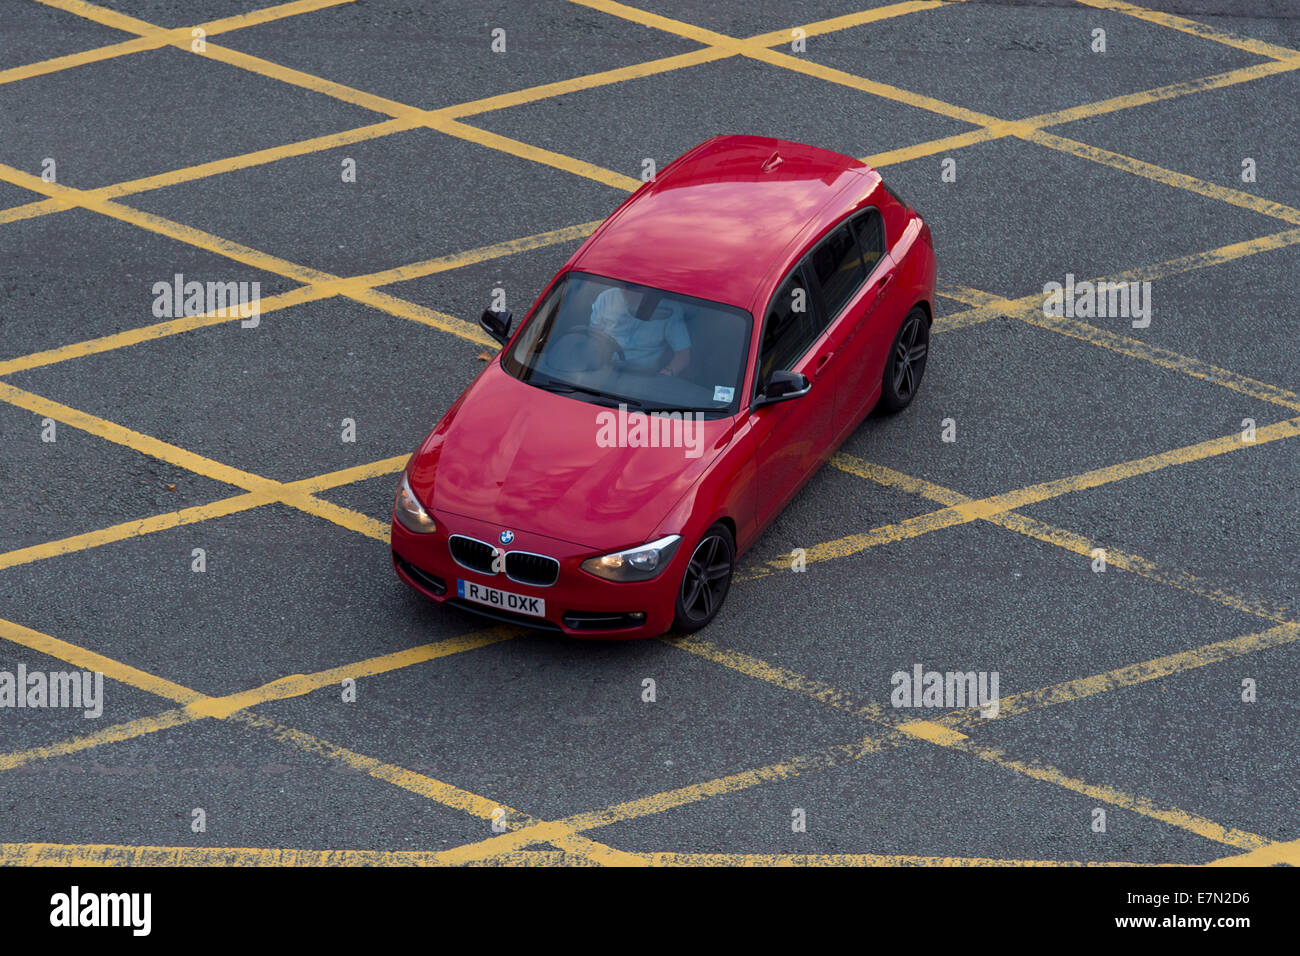 A red car in a yellow box junction. Stock Photo